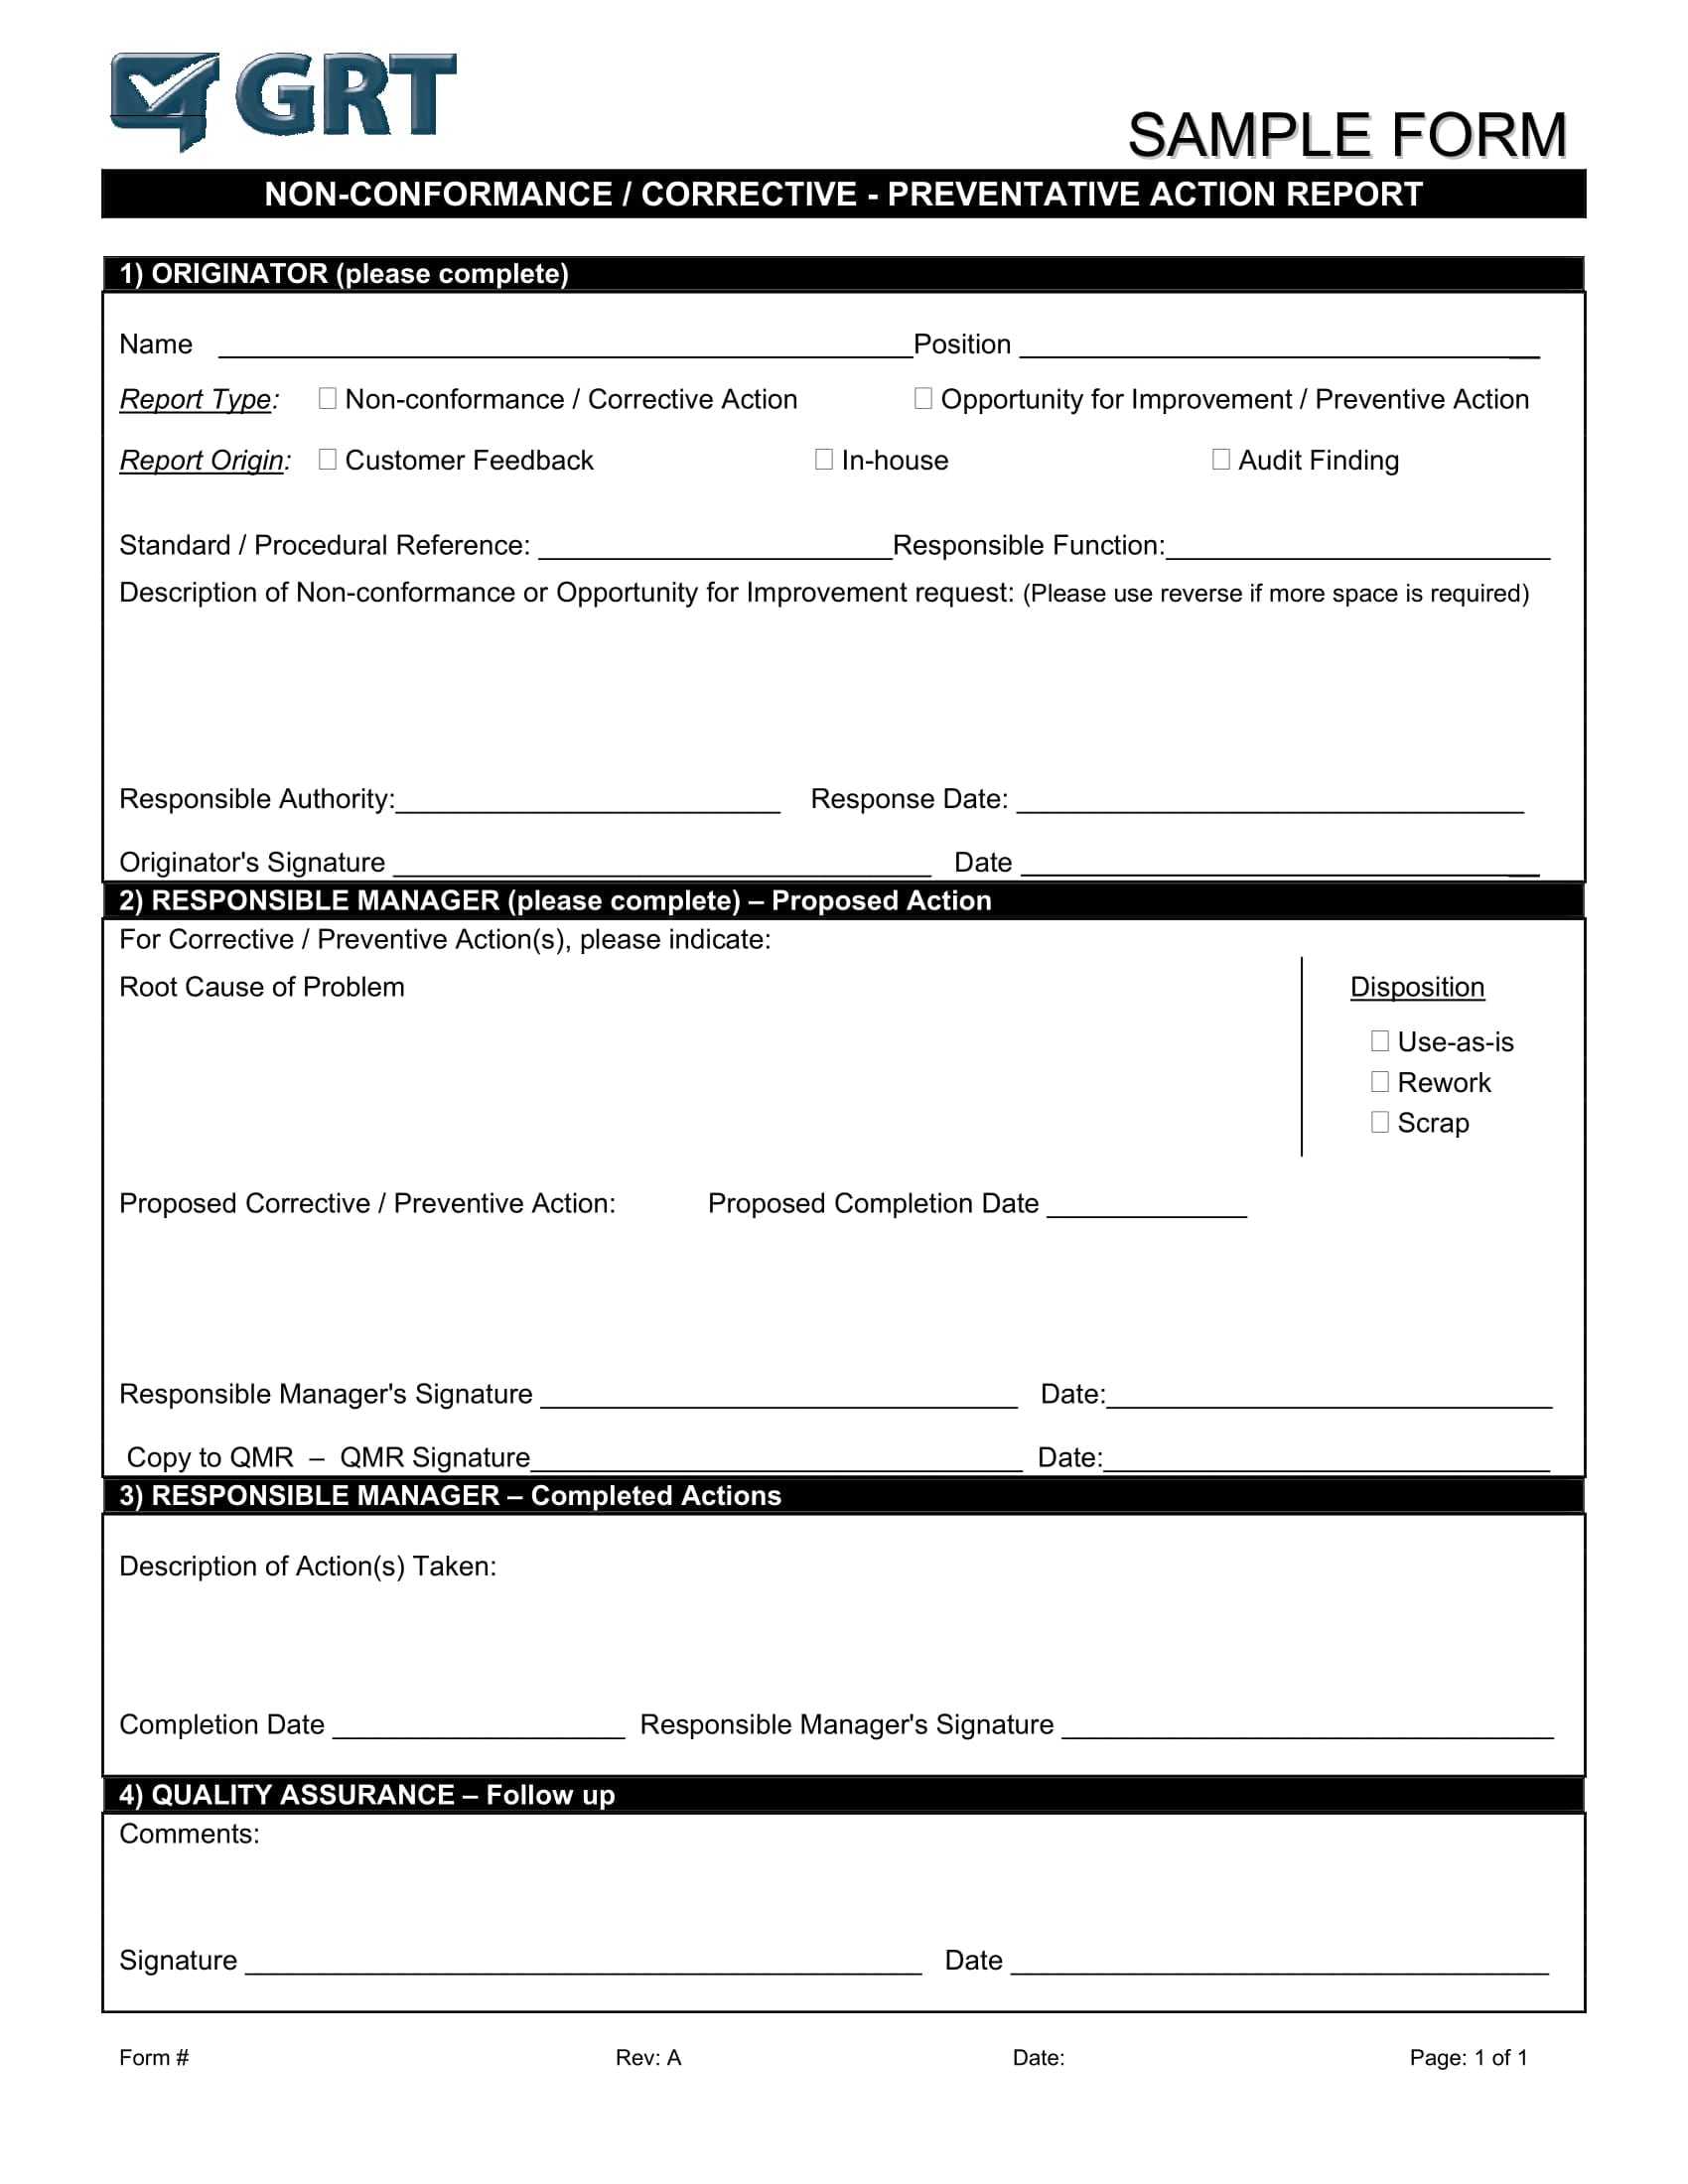 012 Corrective Action Form Template Manufacturing Non Throughout Quality Non Conformance Report Template